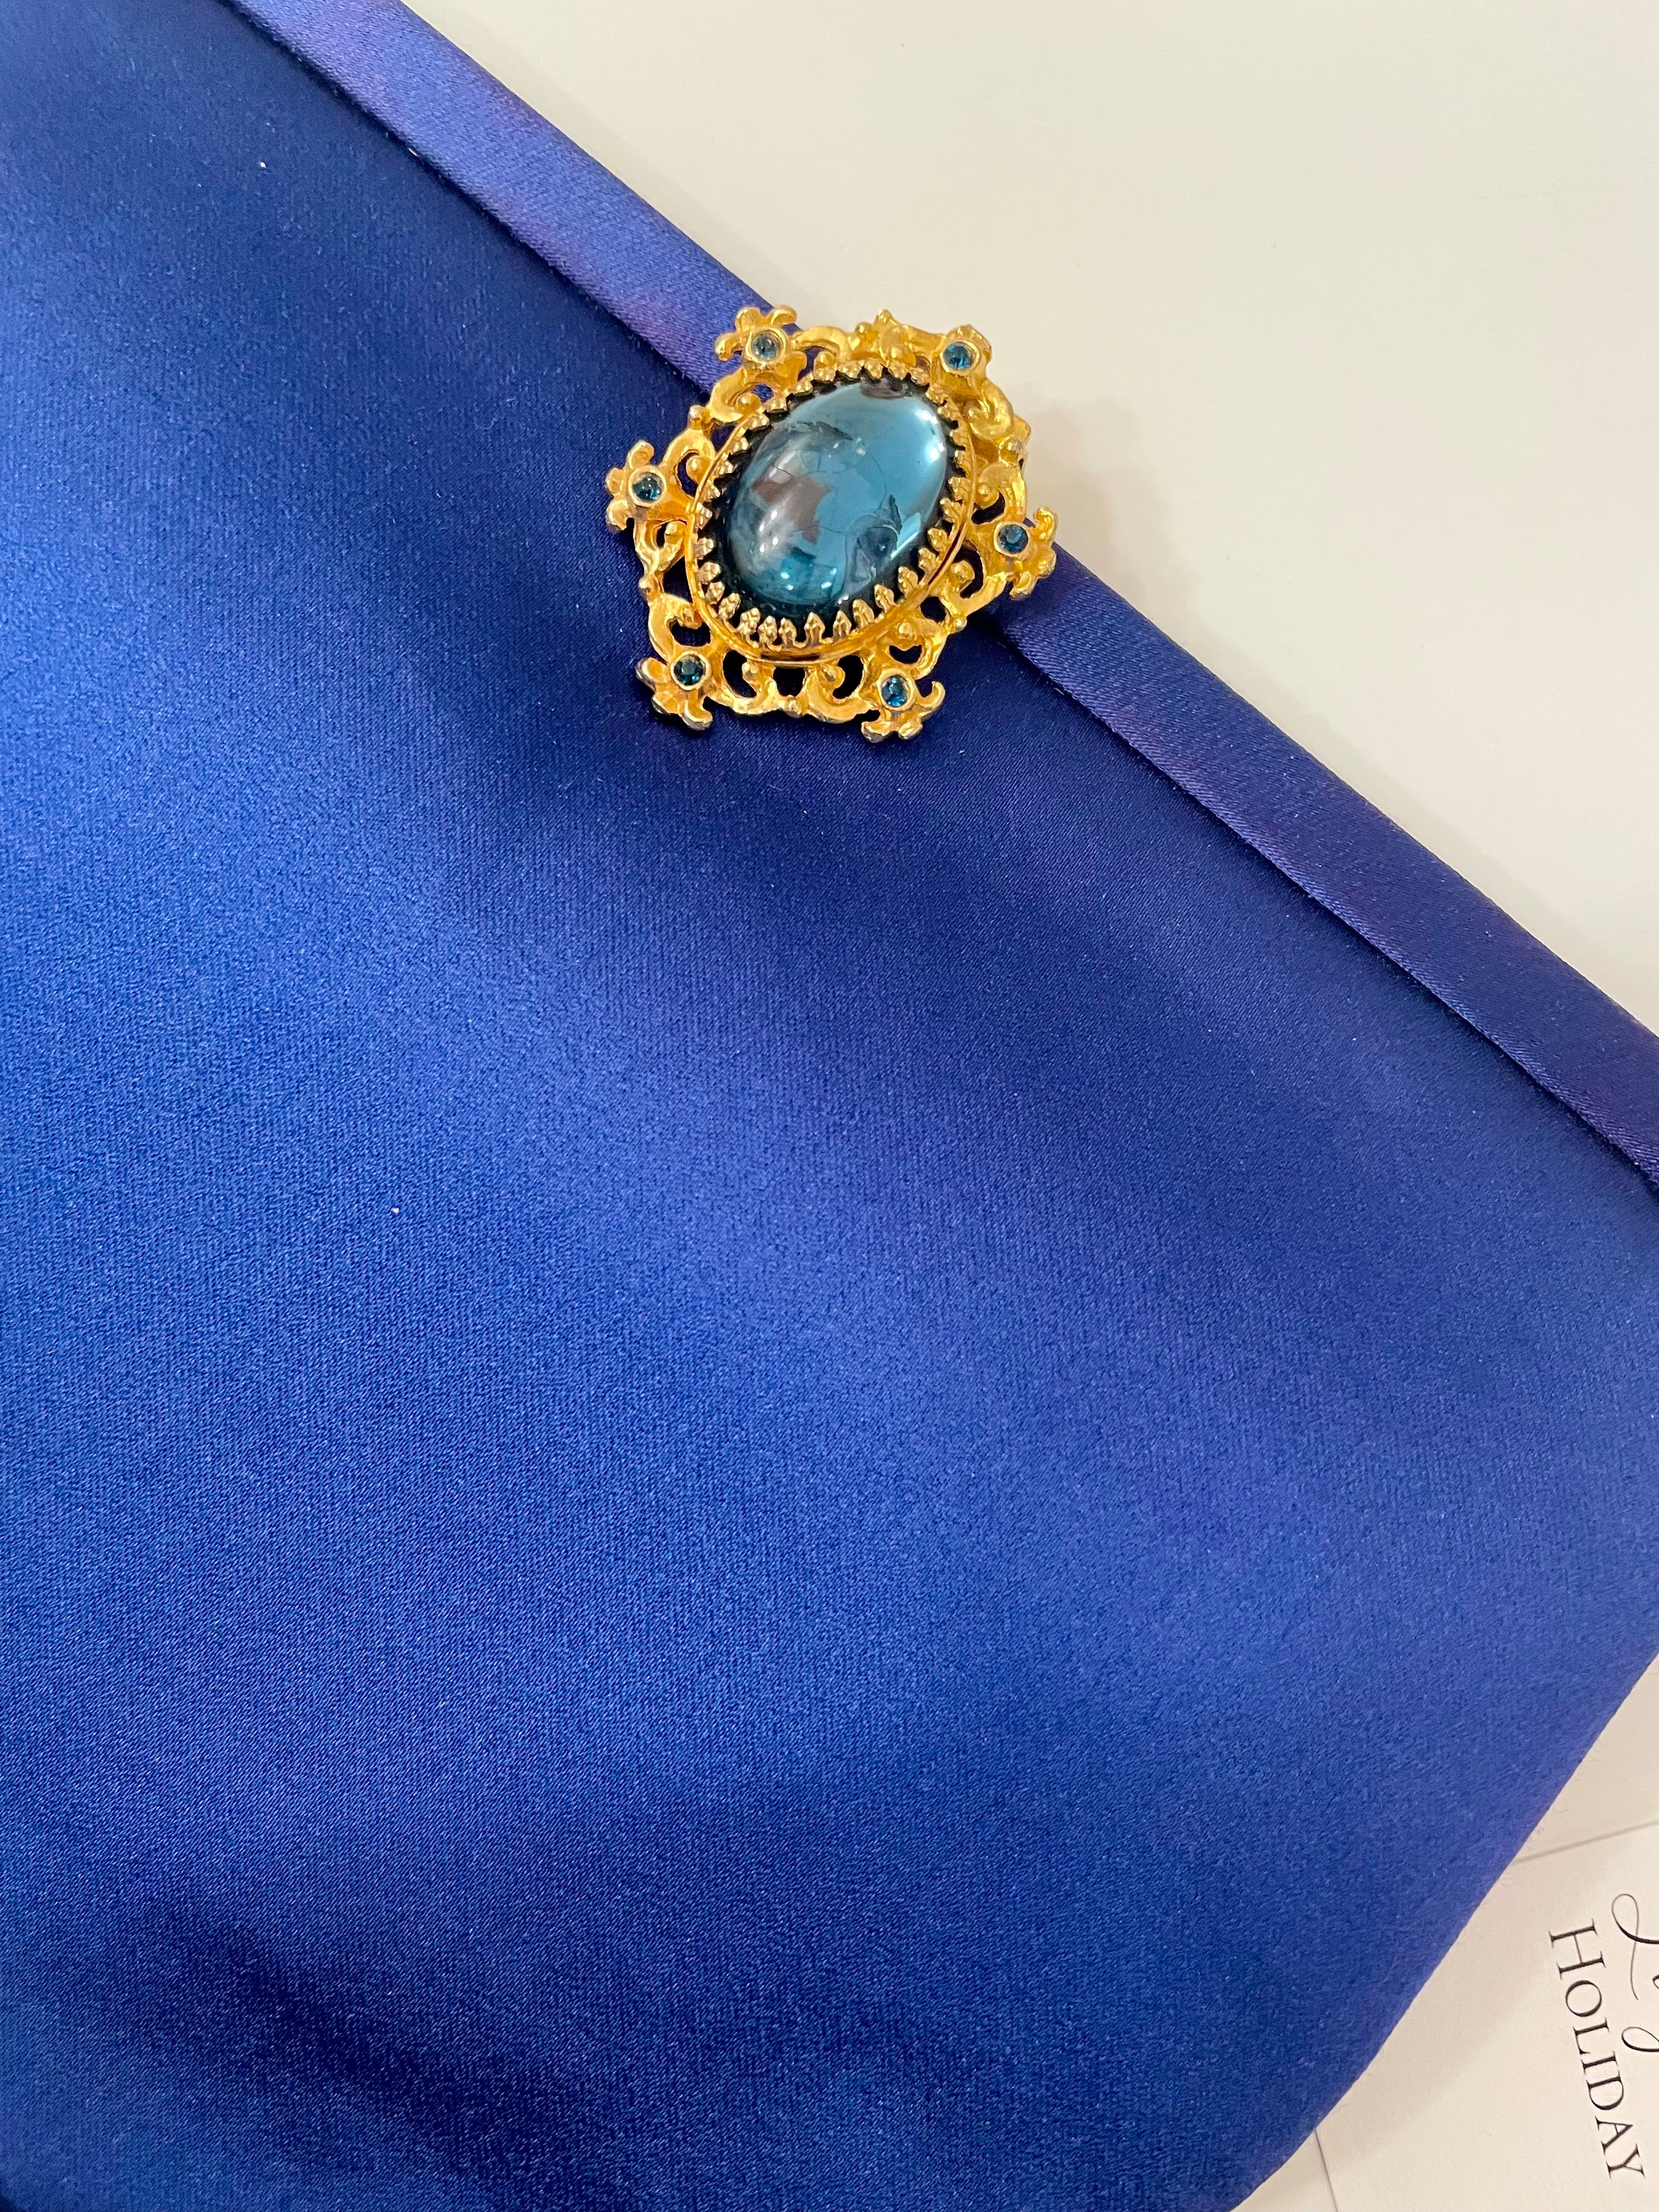 Glamorous and chic, 1960's vintage rich royal blue satin clutch bag, with stunning closure...so elegant